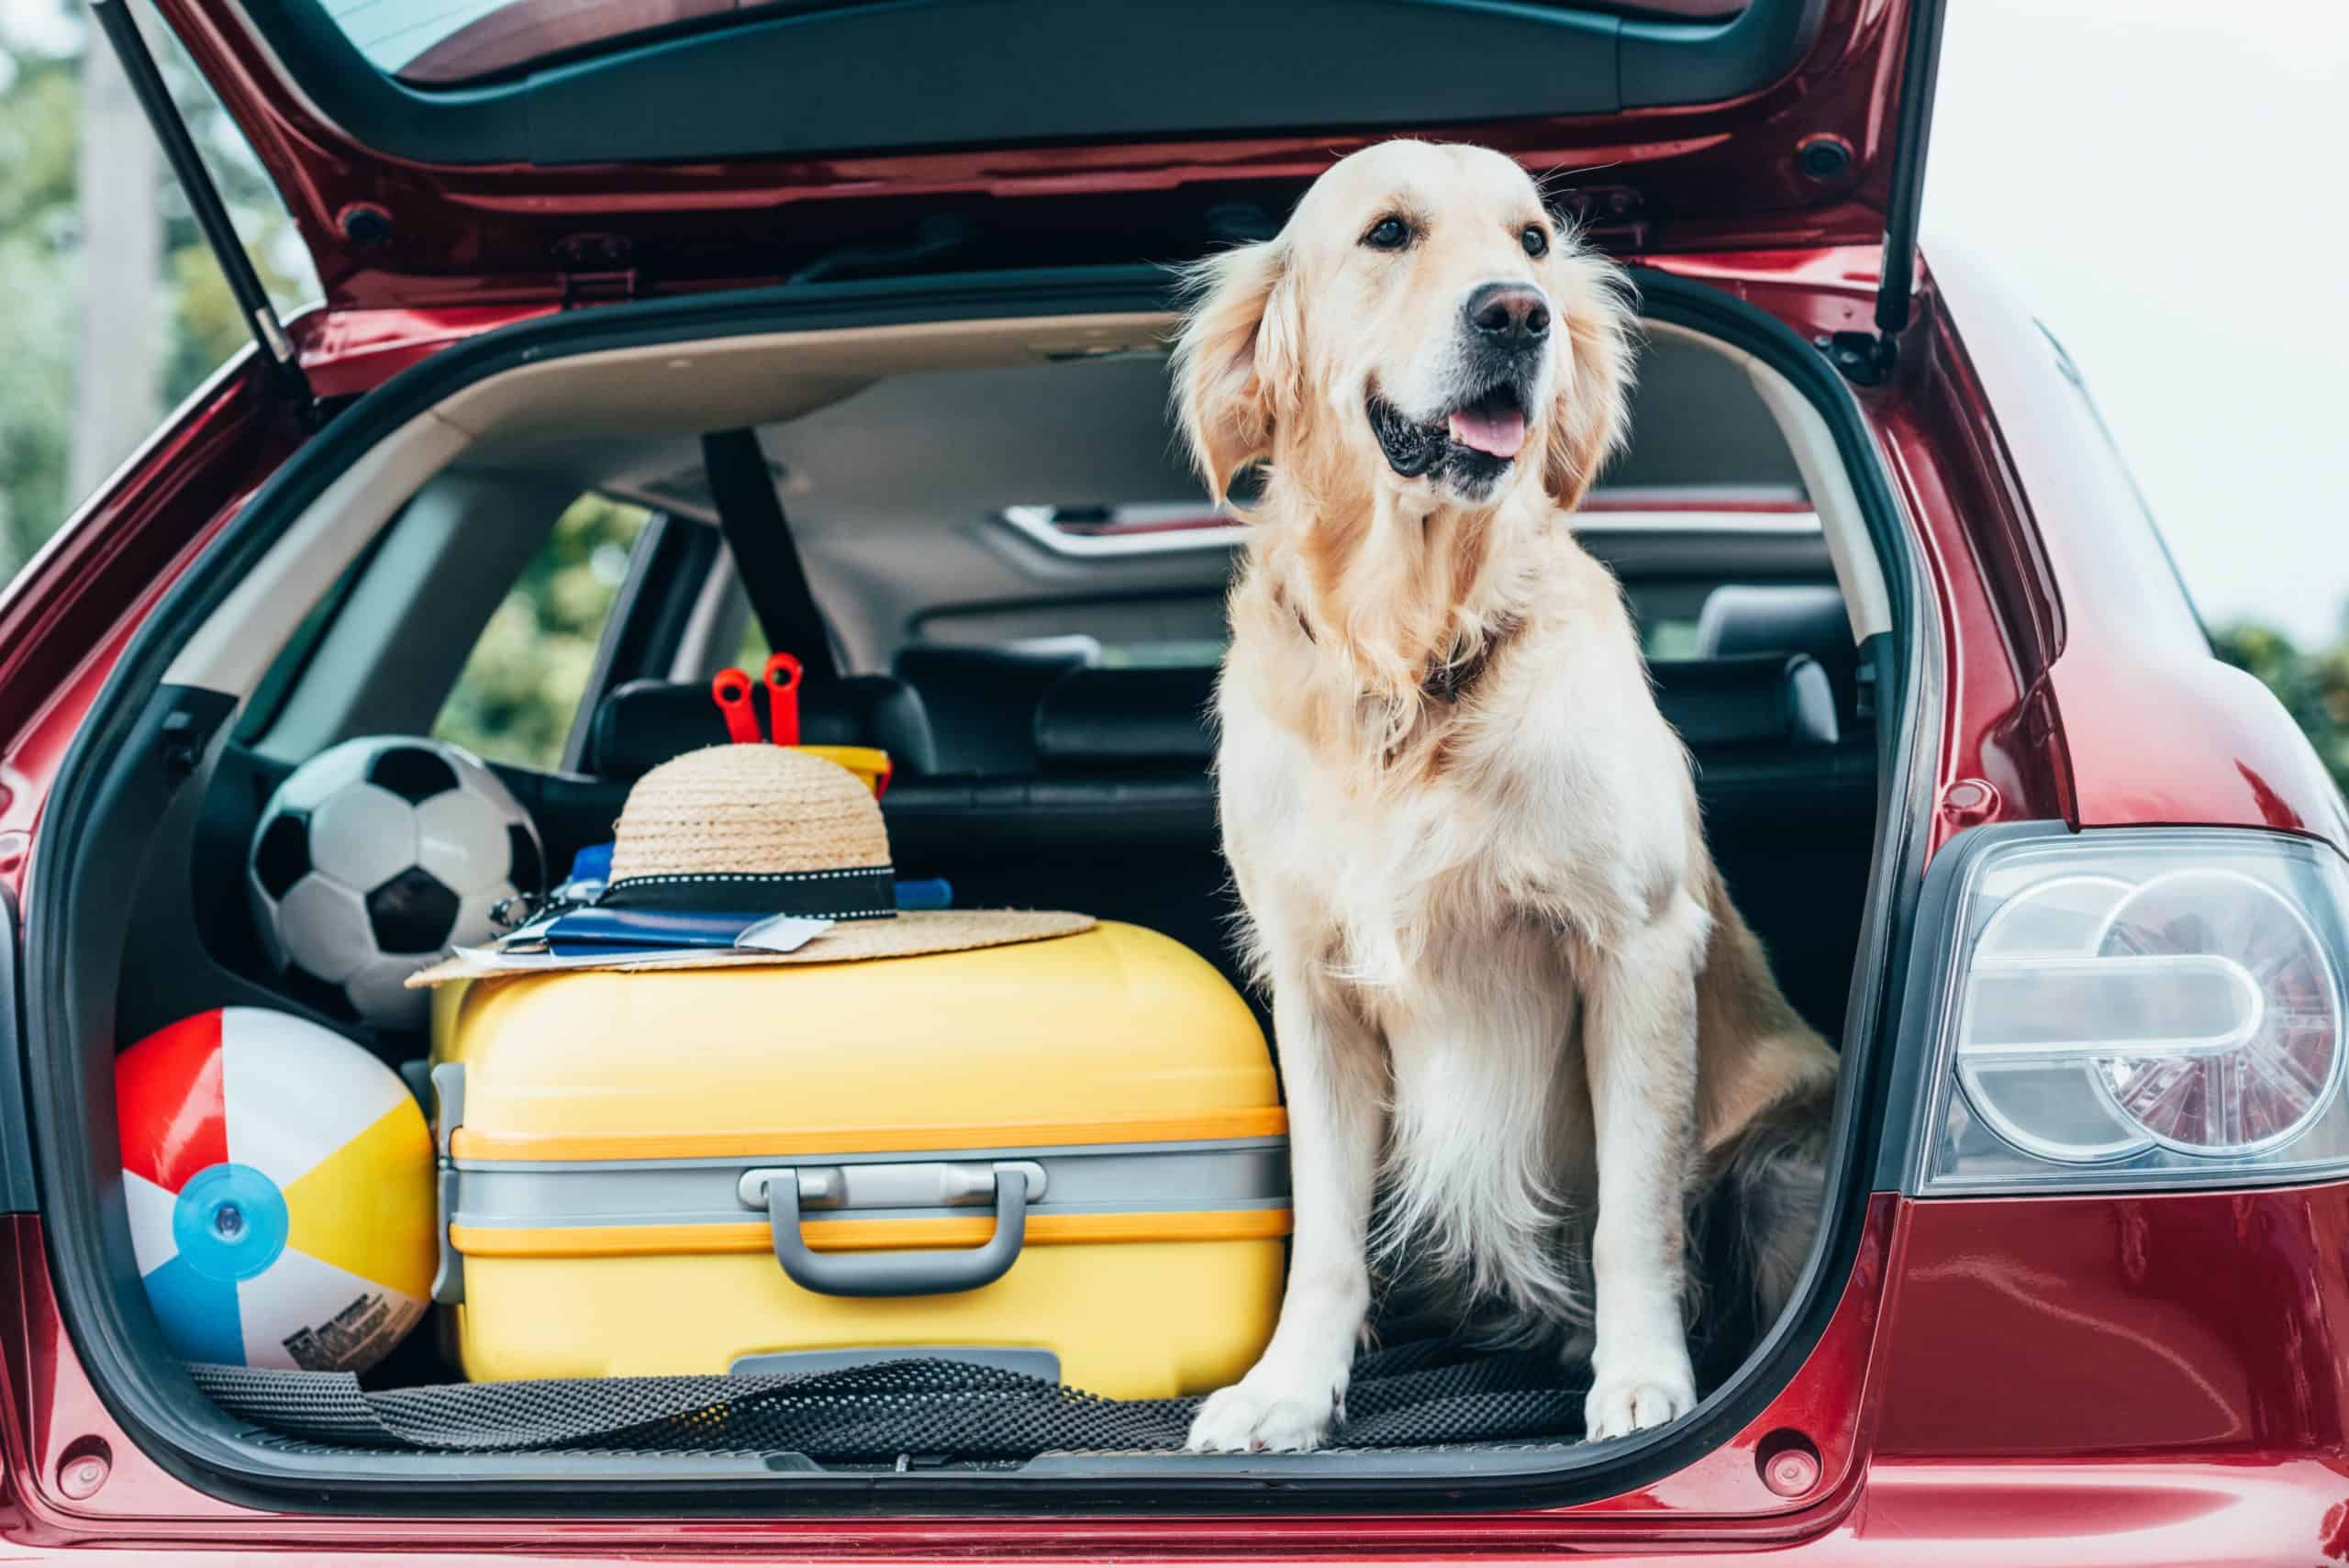 Golden retriever sits in the back of SUV packed for a dog-friendly travel adventure.